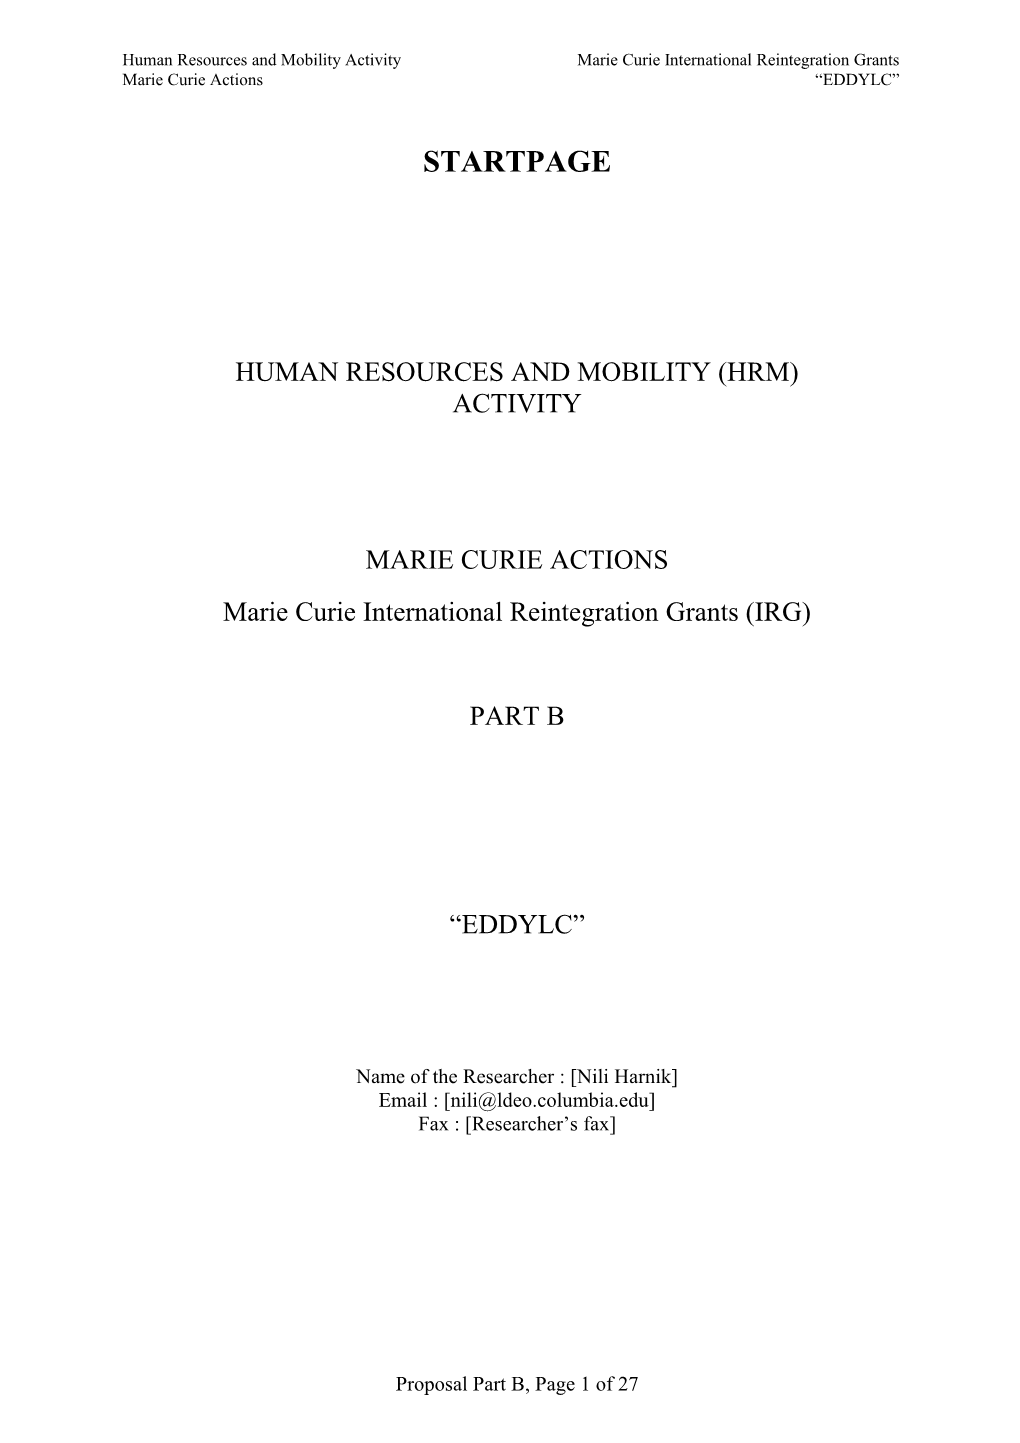 Human Resources and Mobility (Hrm) Activity